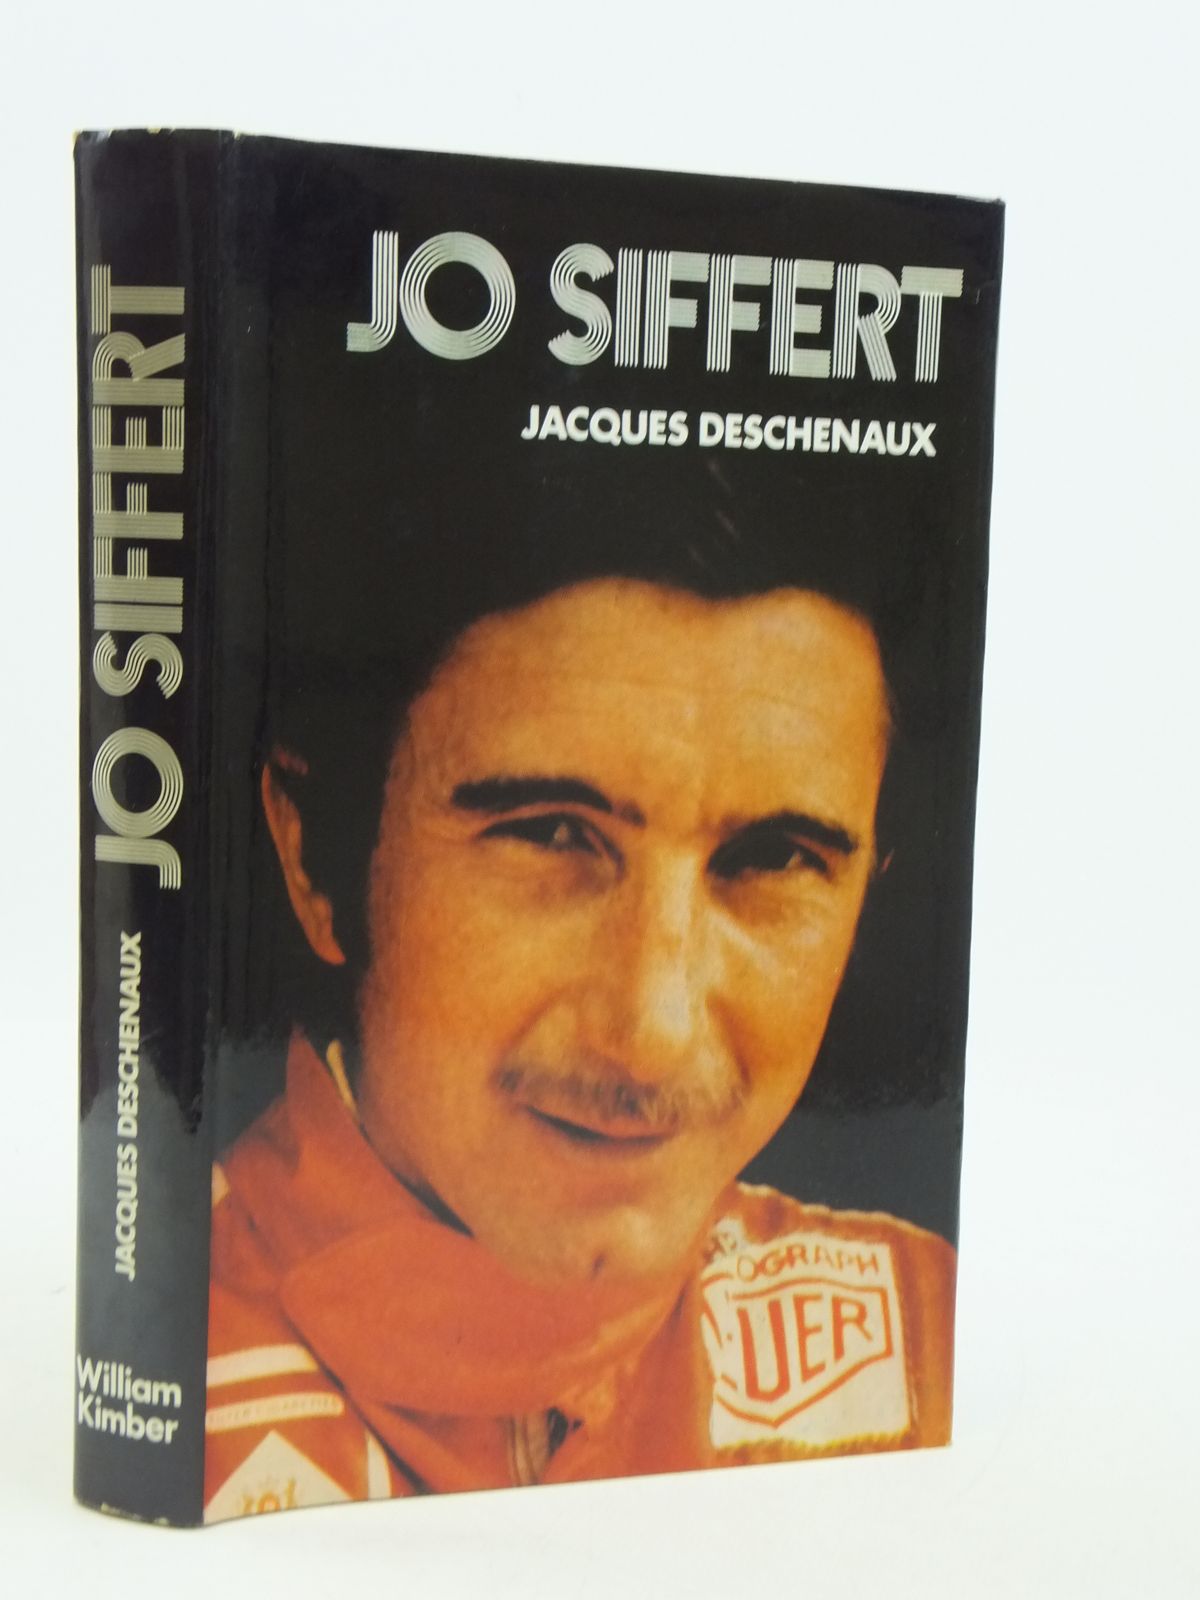 Written by Jacques Deschenaux. Stock no. 1604759. Published by William Kimber. 1st. 1972. Very good condition in a very good condition wrapper. - 1604759